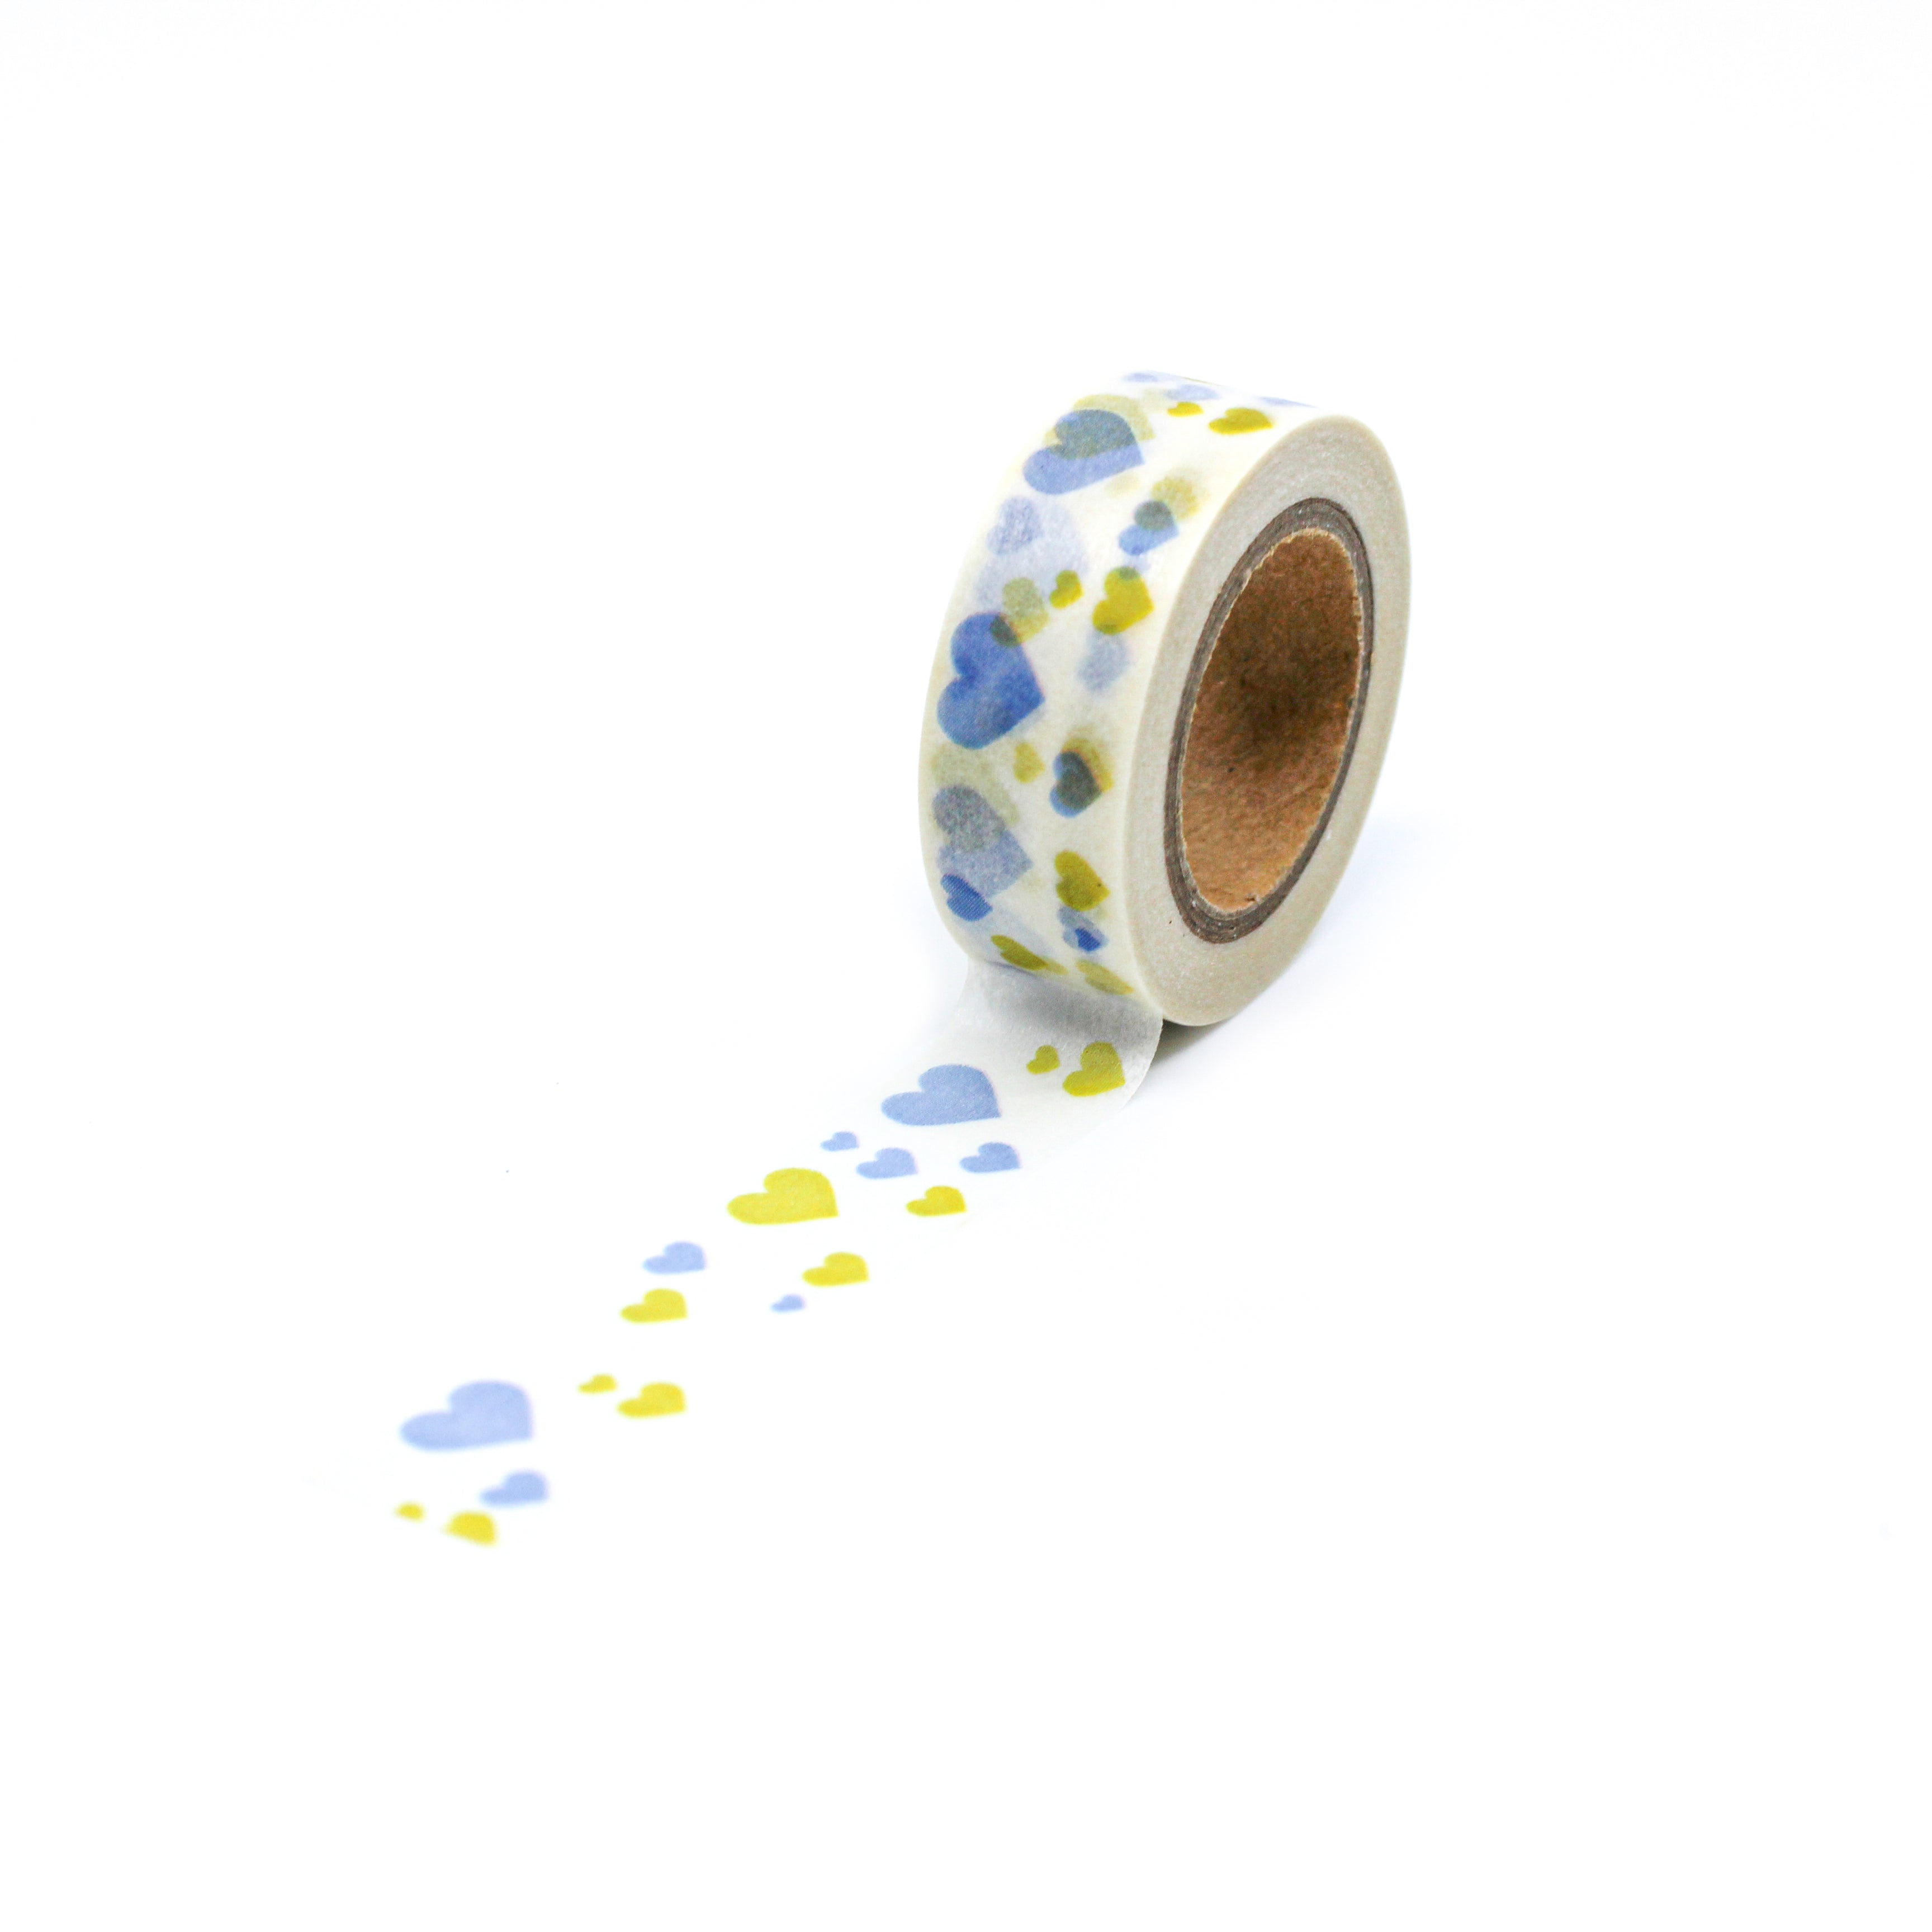 This is a full pattern repeat view of blue and yellow multi-hearts washi tape BBB Supplies Craft Shop